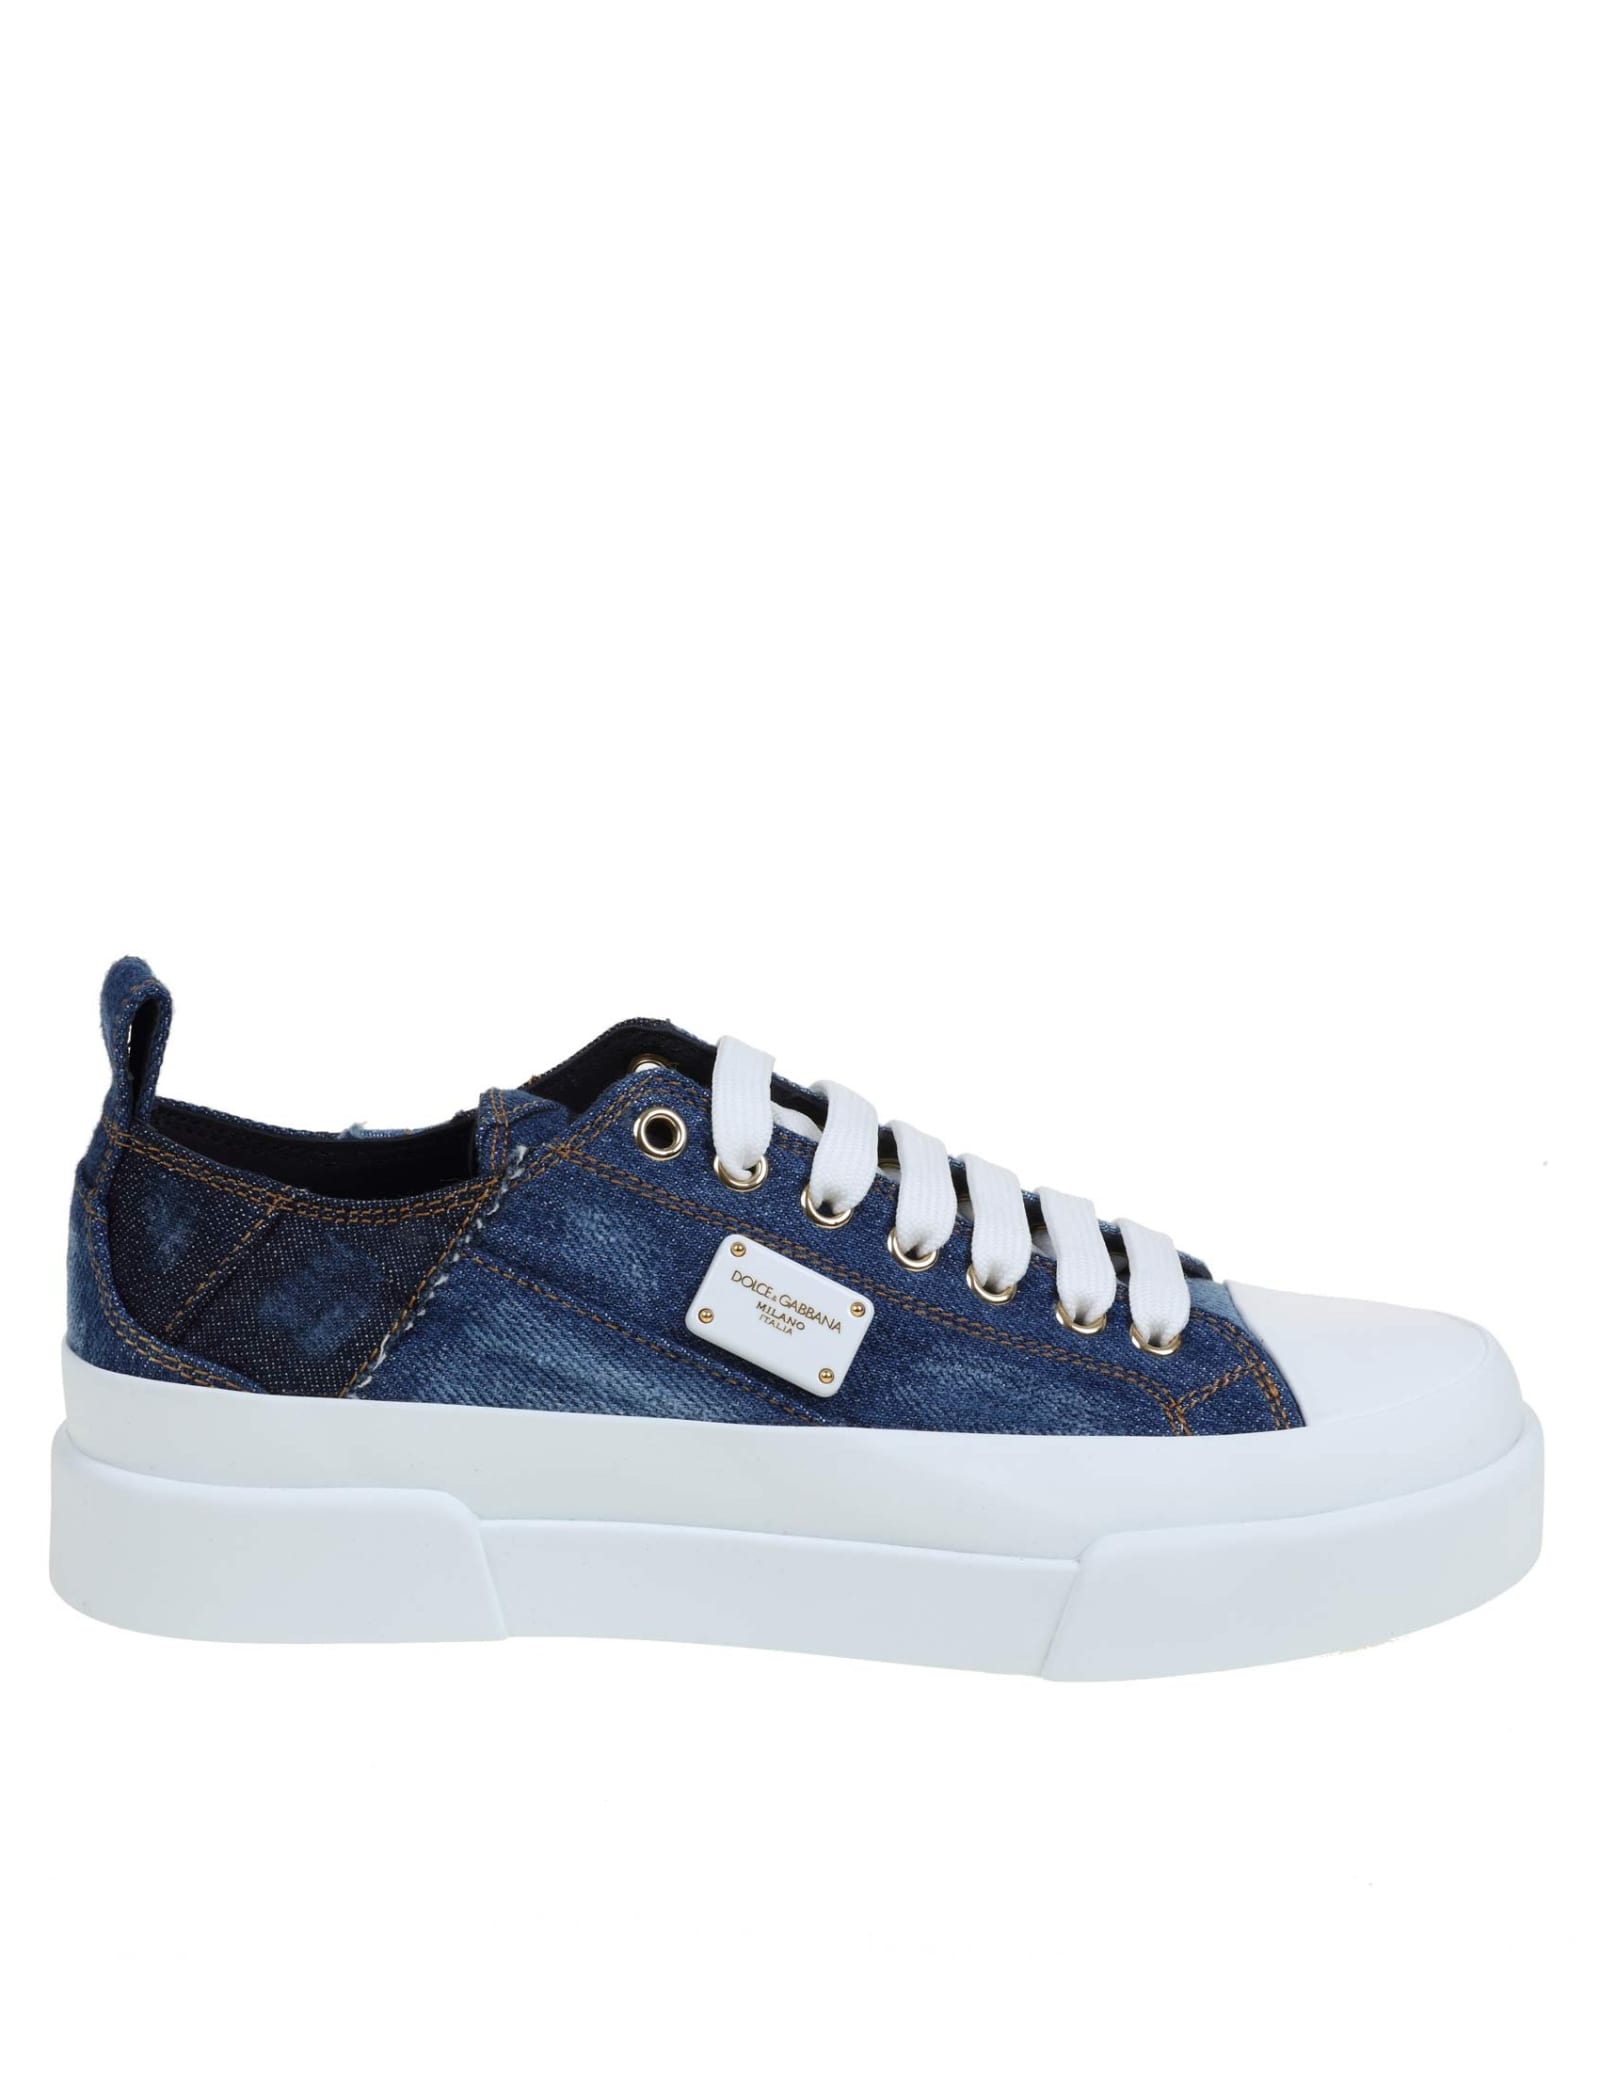 Buy Dolce & Gabbana Portofino Light Sneakers In Patchwork Denim And Leather online, shop Dolce & Gabbana shoes with free shipping